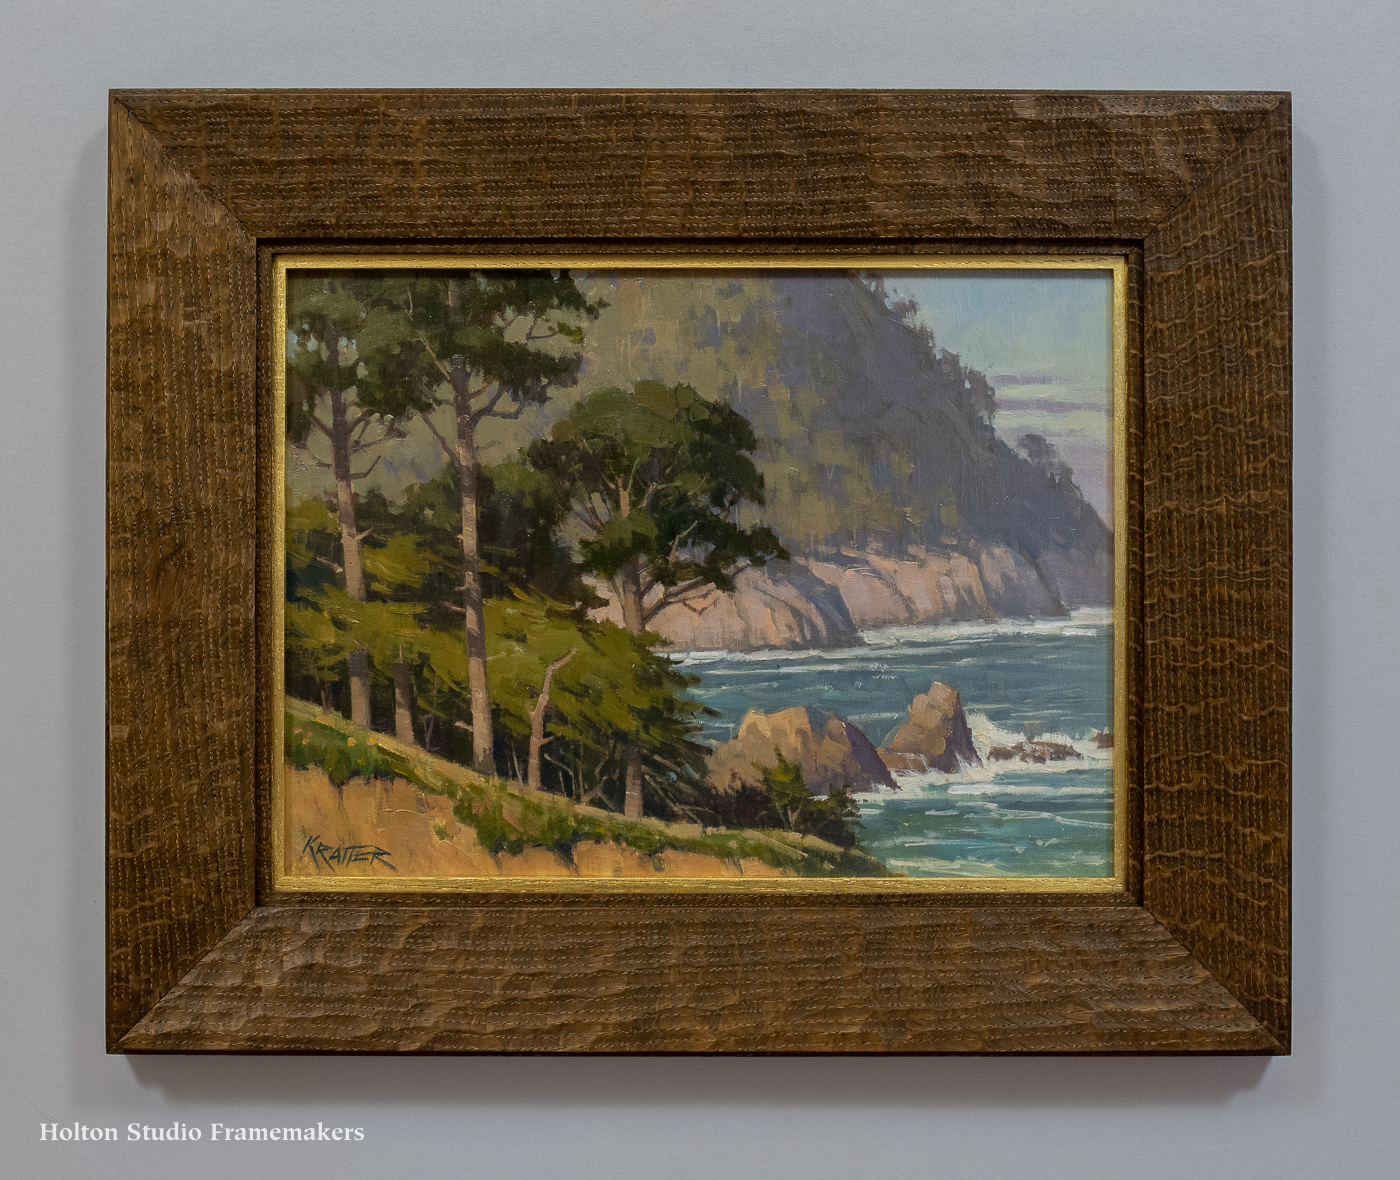 Paul Kratter, "High Perch, Whaler's Cove, Point Lobos," 2023, oil on panel, 9 x 12 in.